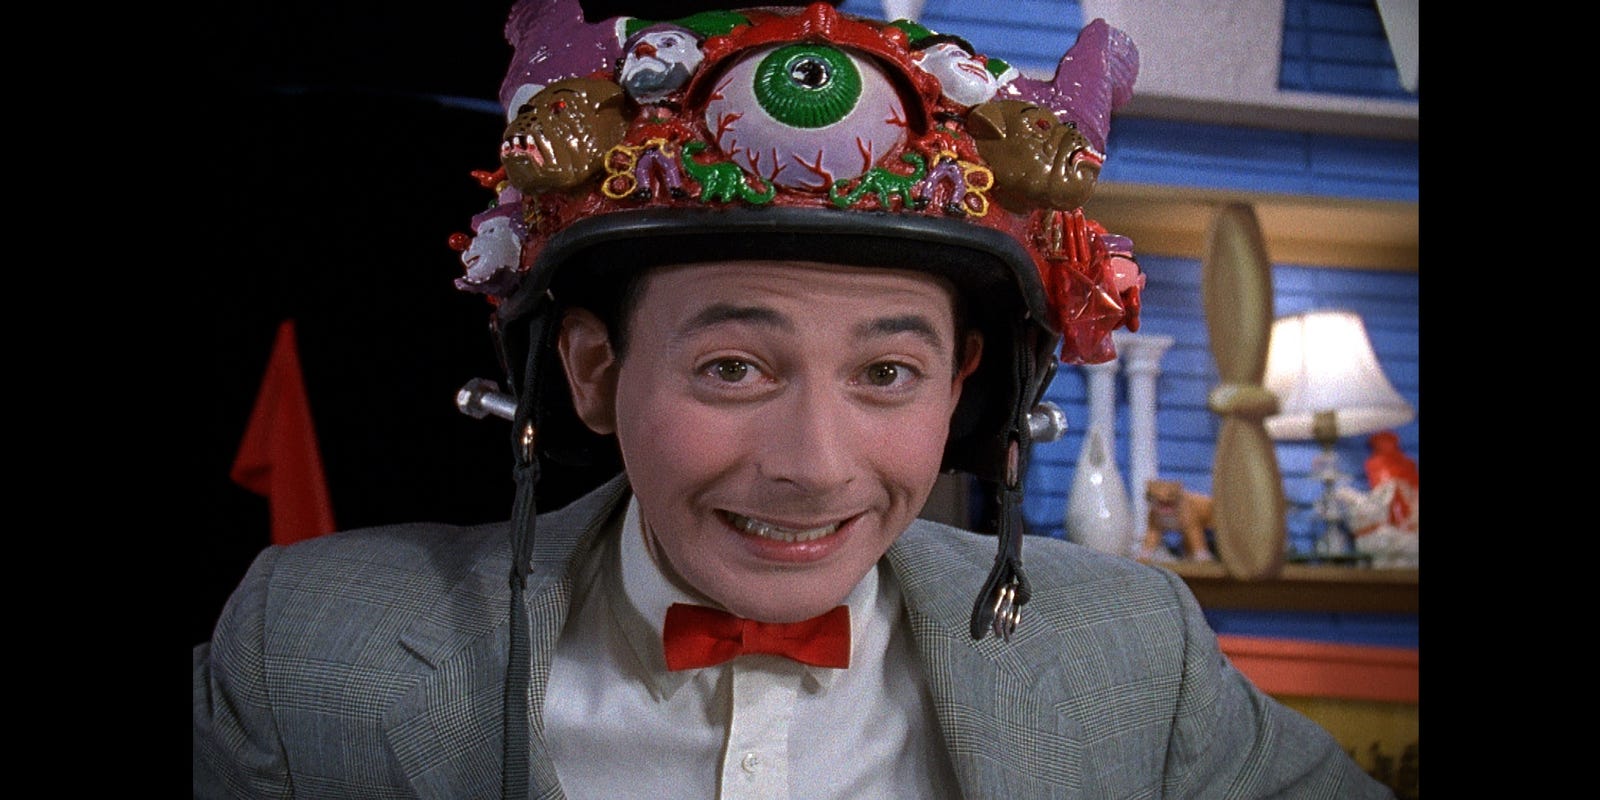 Review: 'Pee-wee's Playhouse' Blu-rays worth the wait.